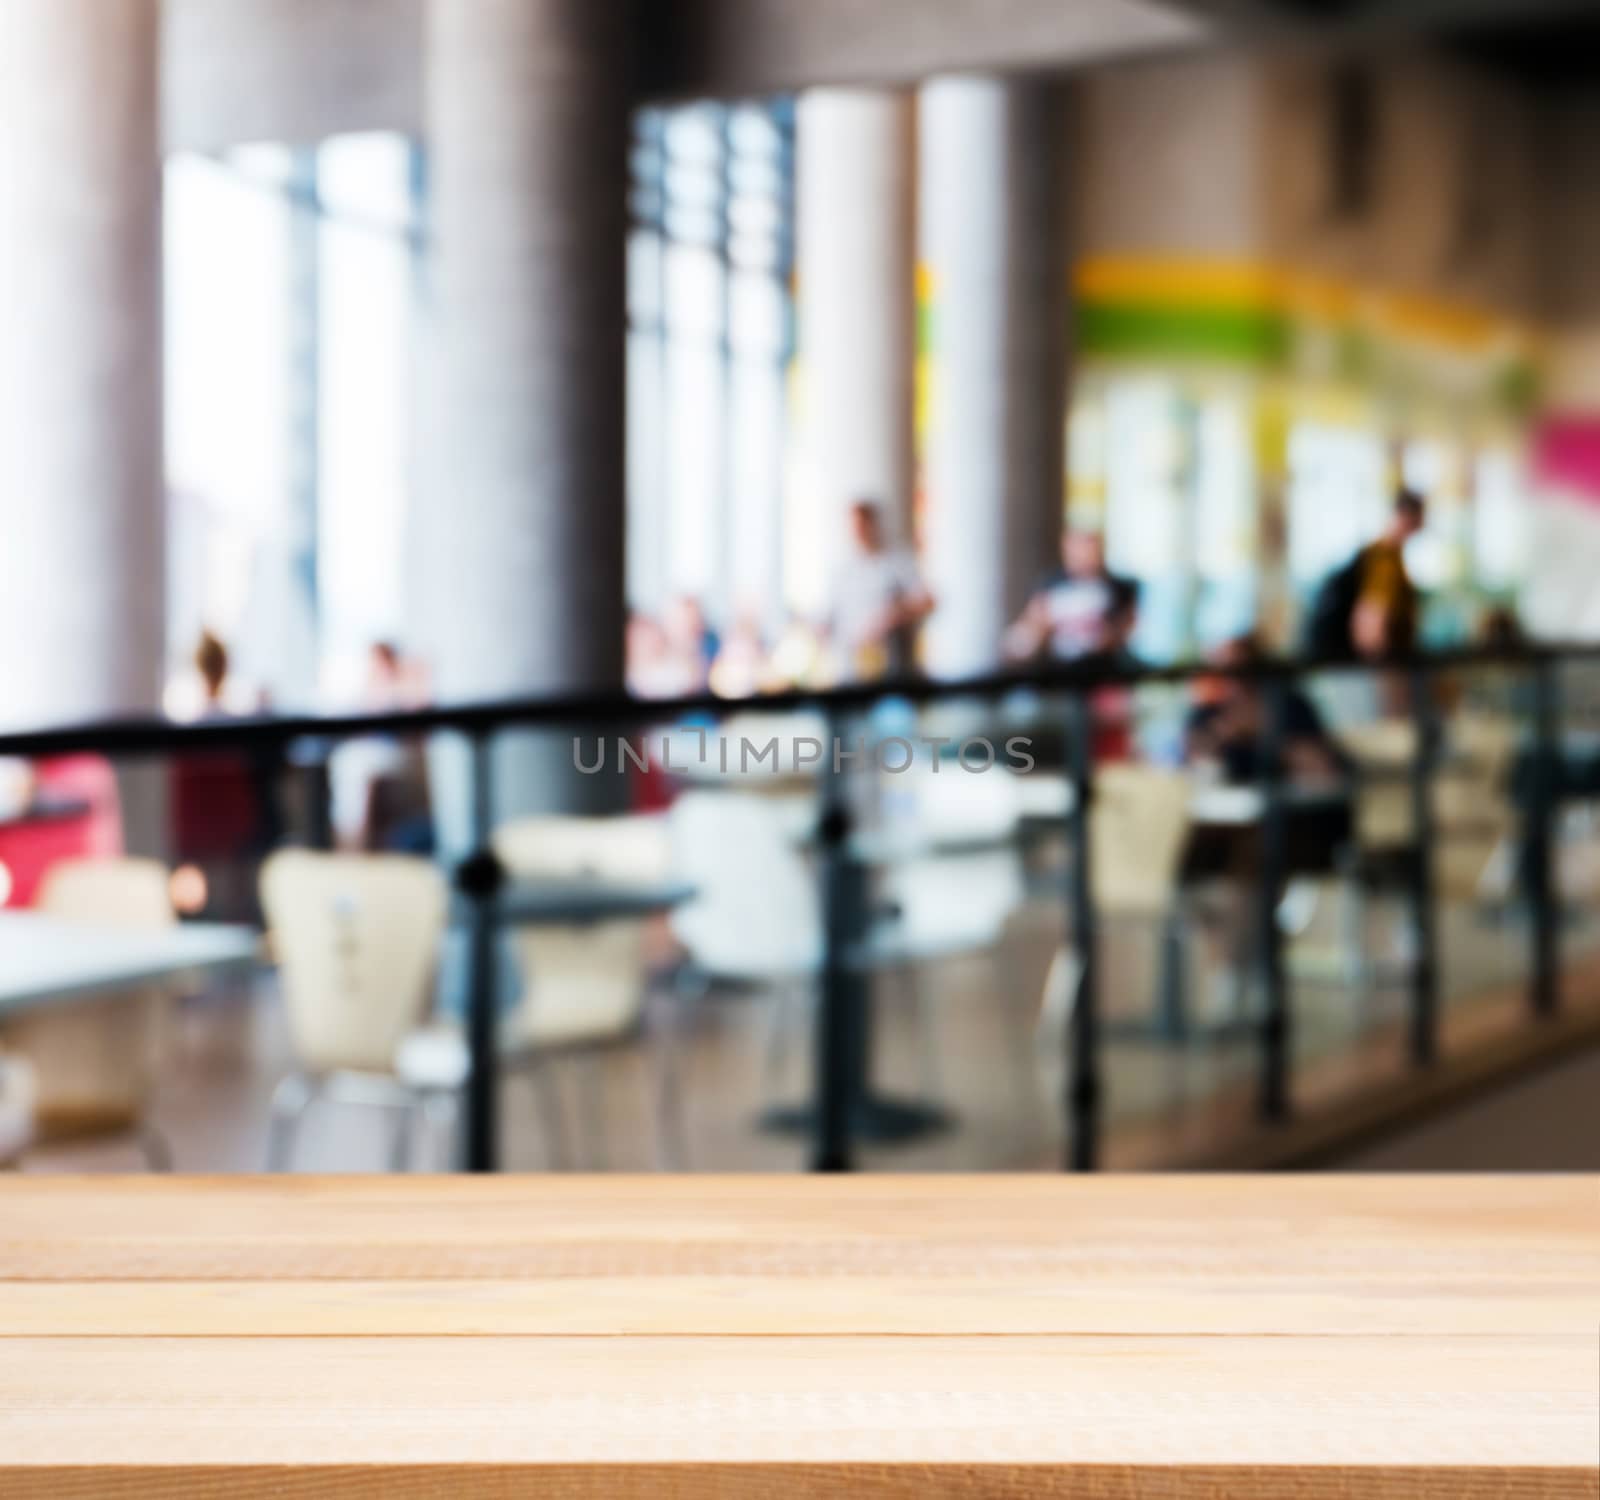 Wooden board empty table in front of blurred background. Perspective light wood table over blur silhouettes of people sitting in a cafe.. Mock up for display or montage your product.